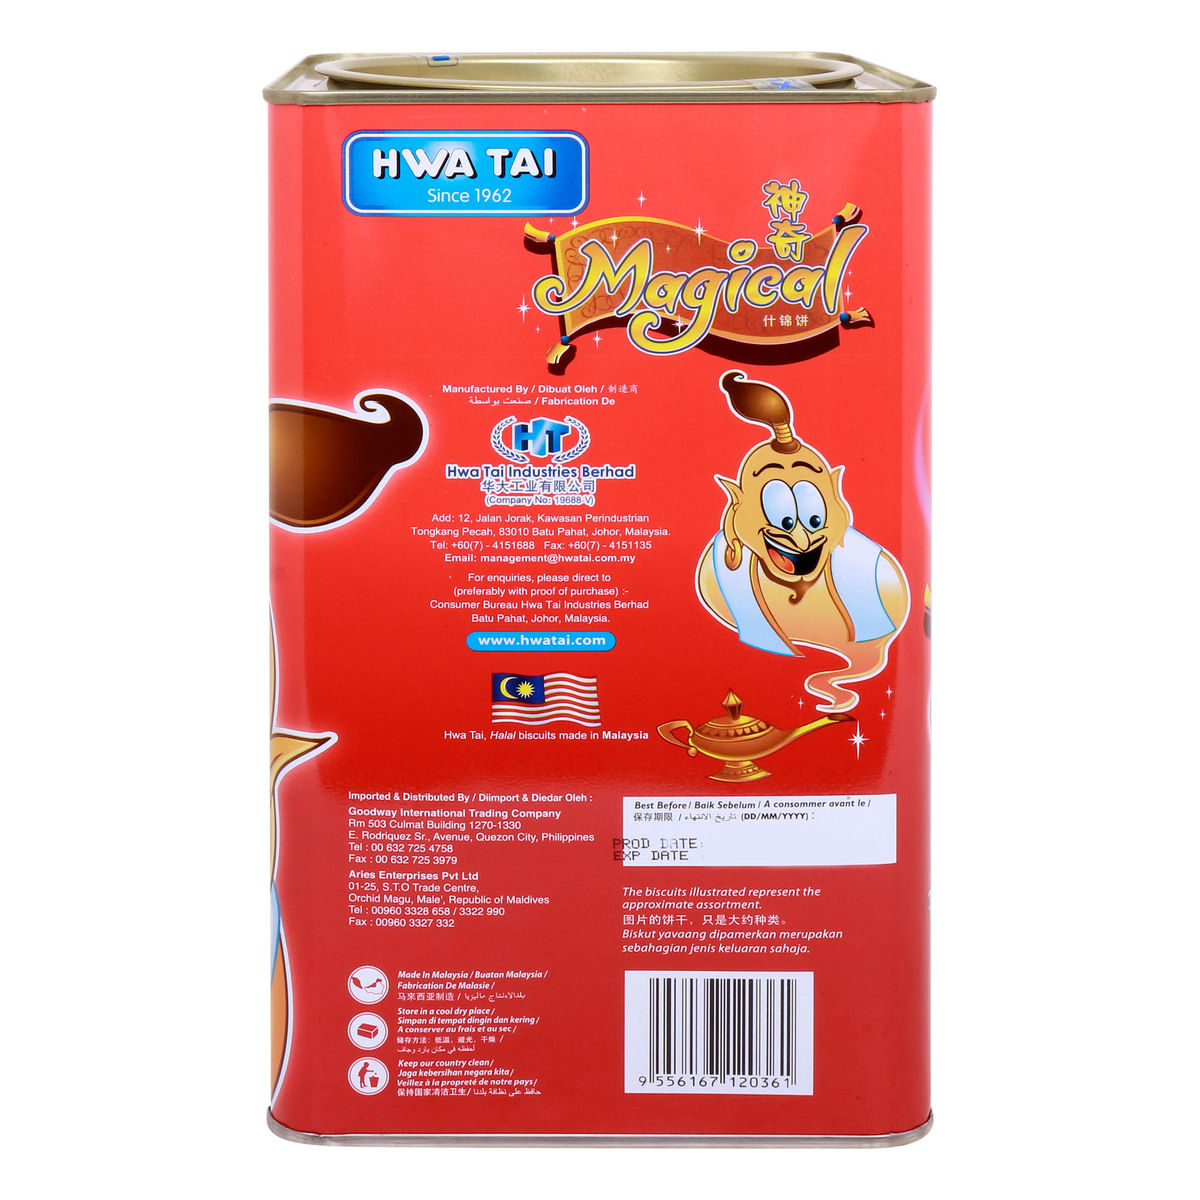 Hwa Tai Magical Assorted Biscuits 650 g